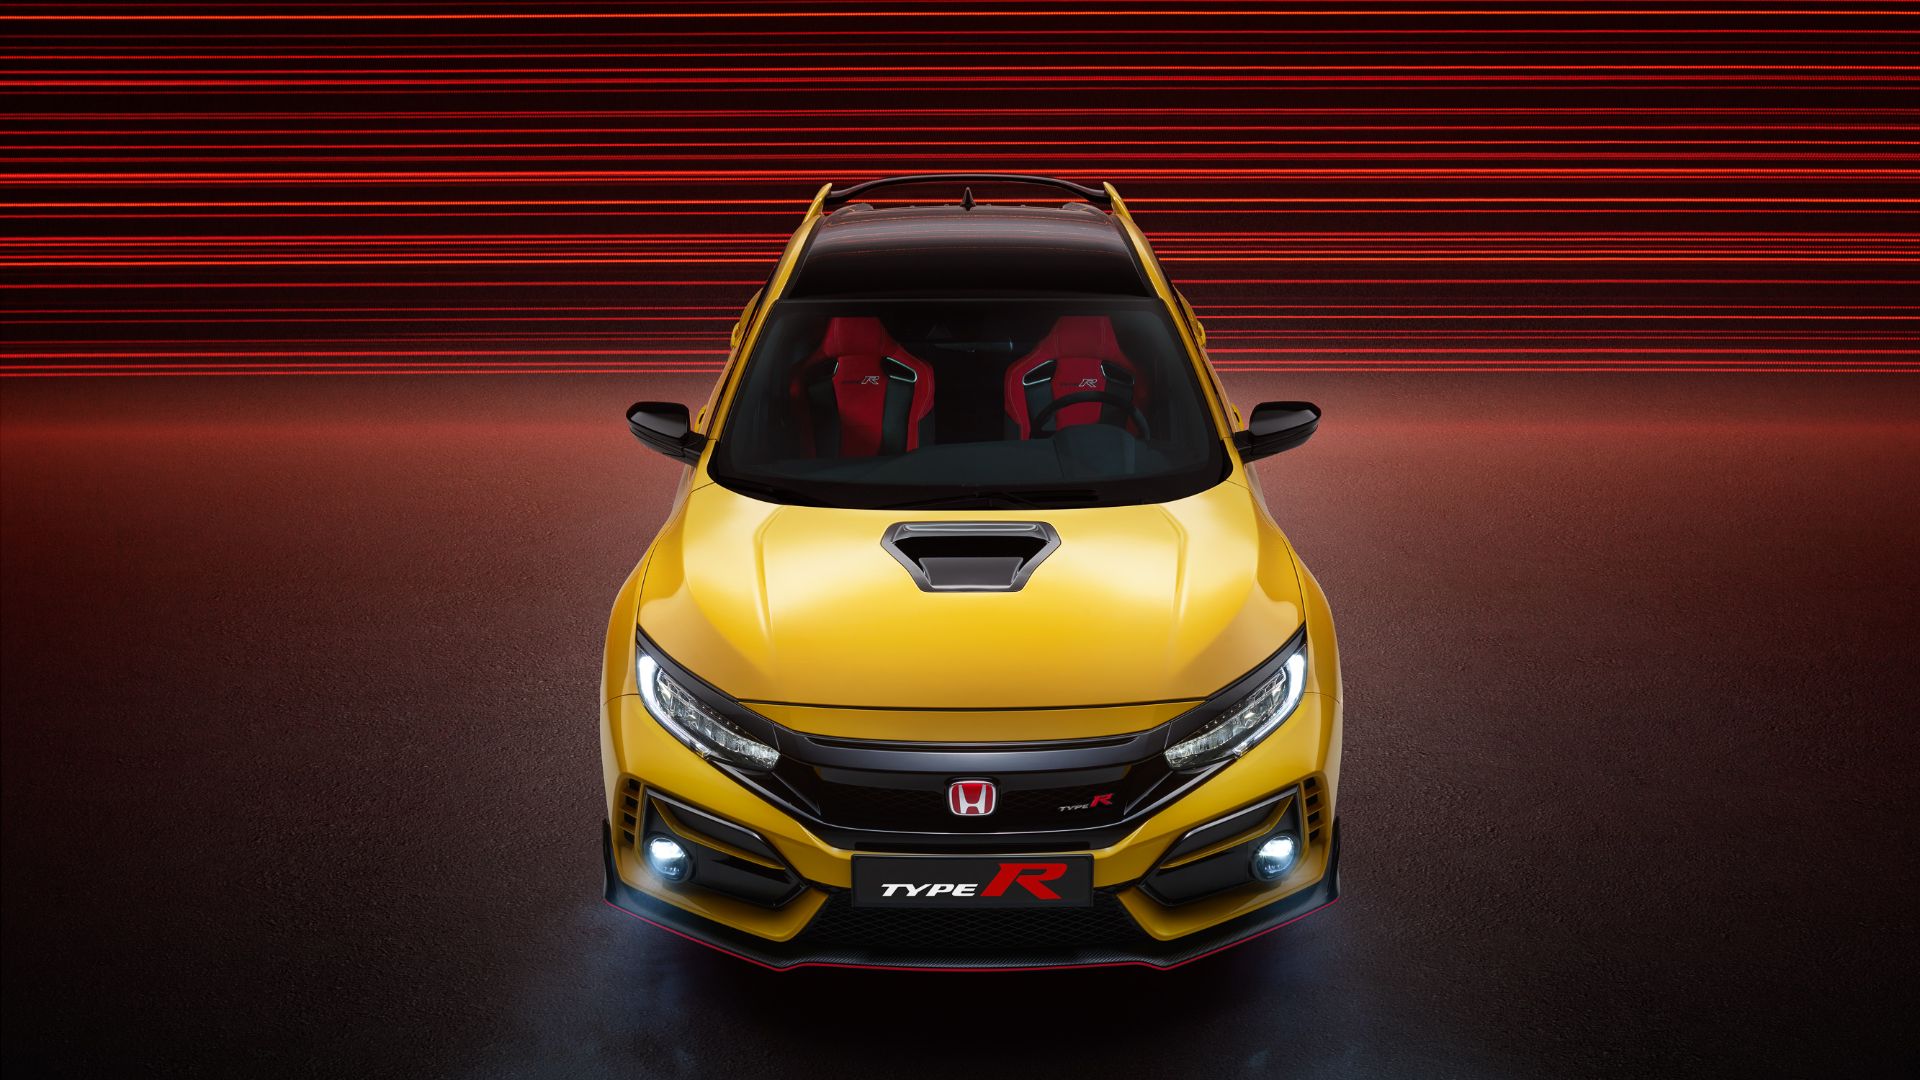 2020 Honda Civic Type R limited edition sells out